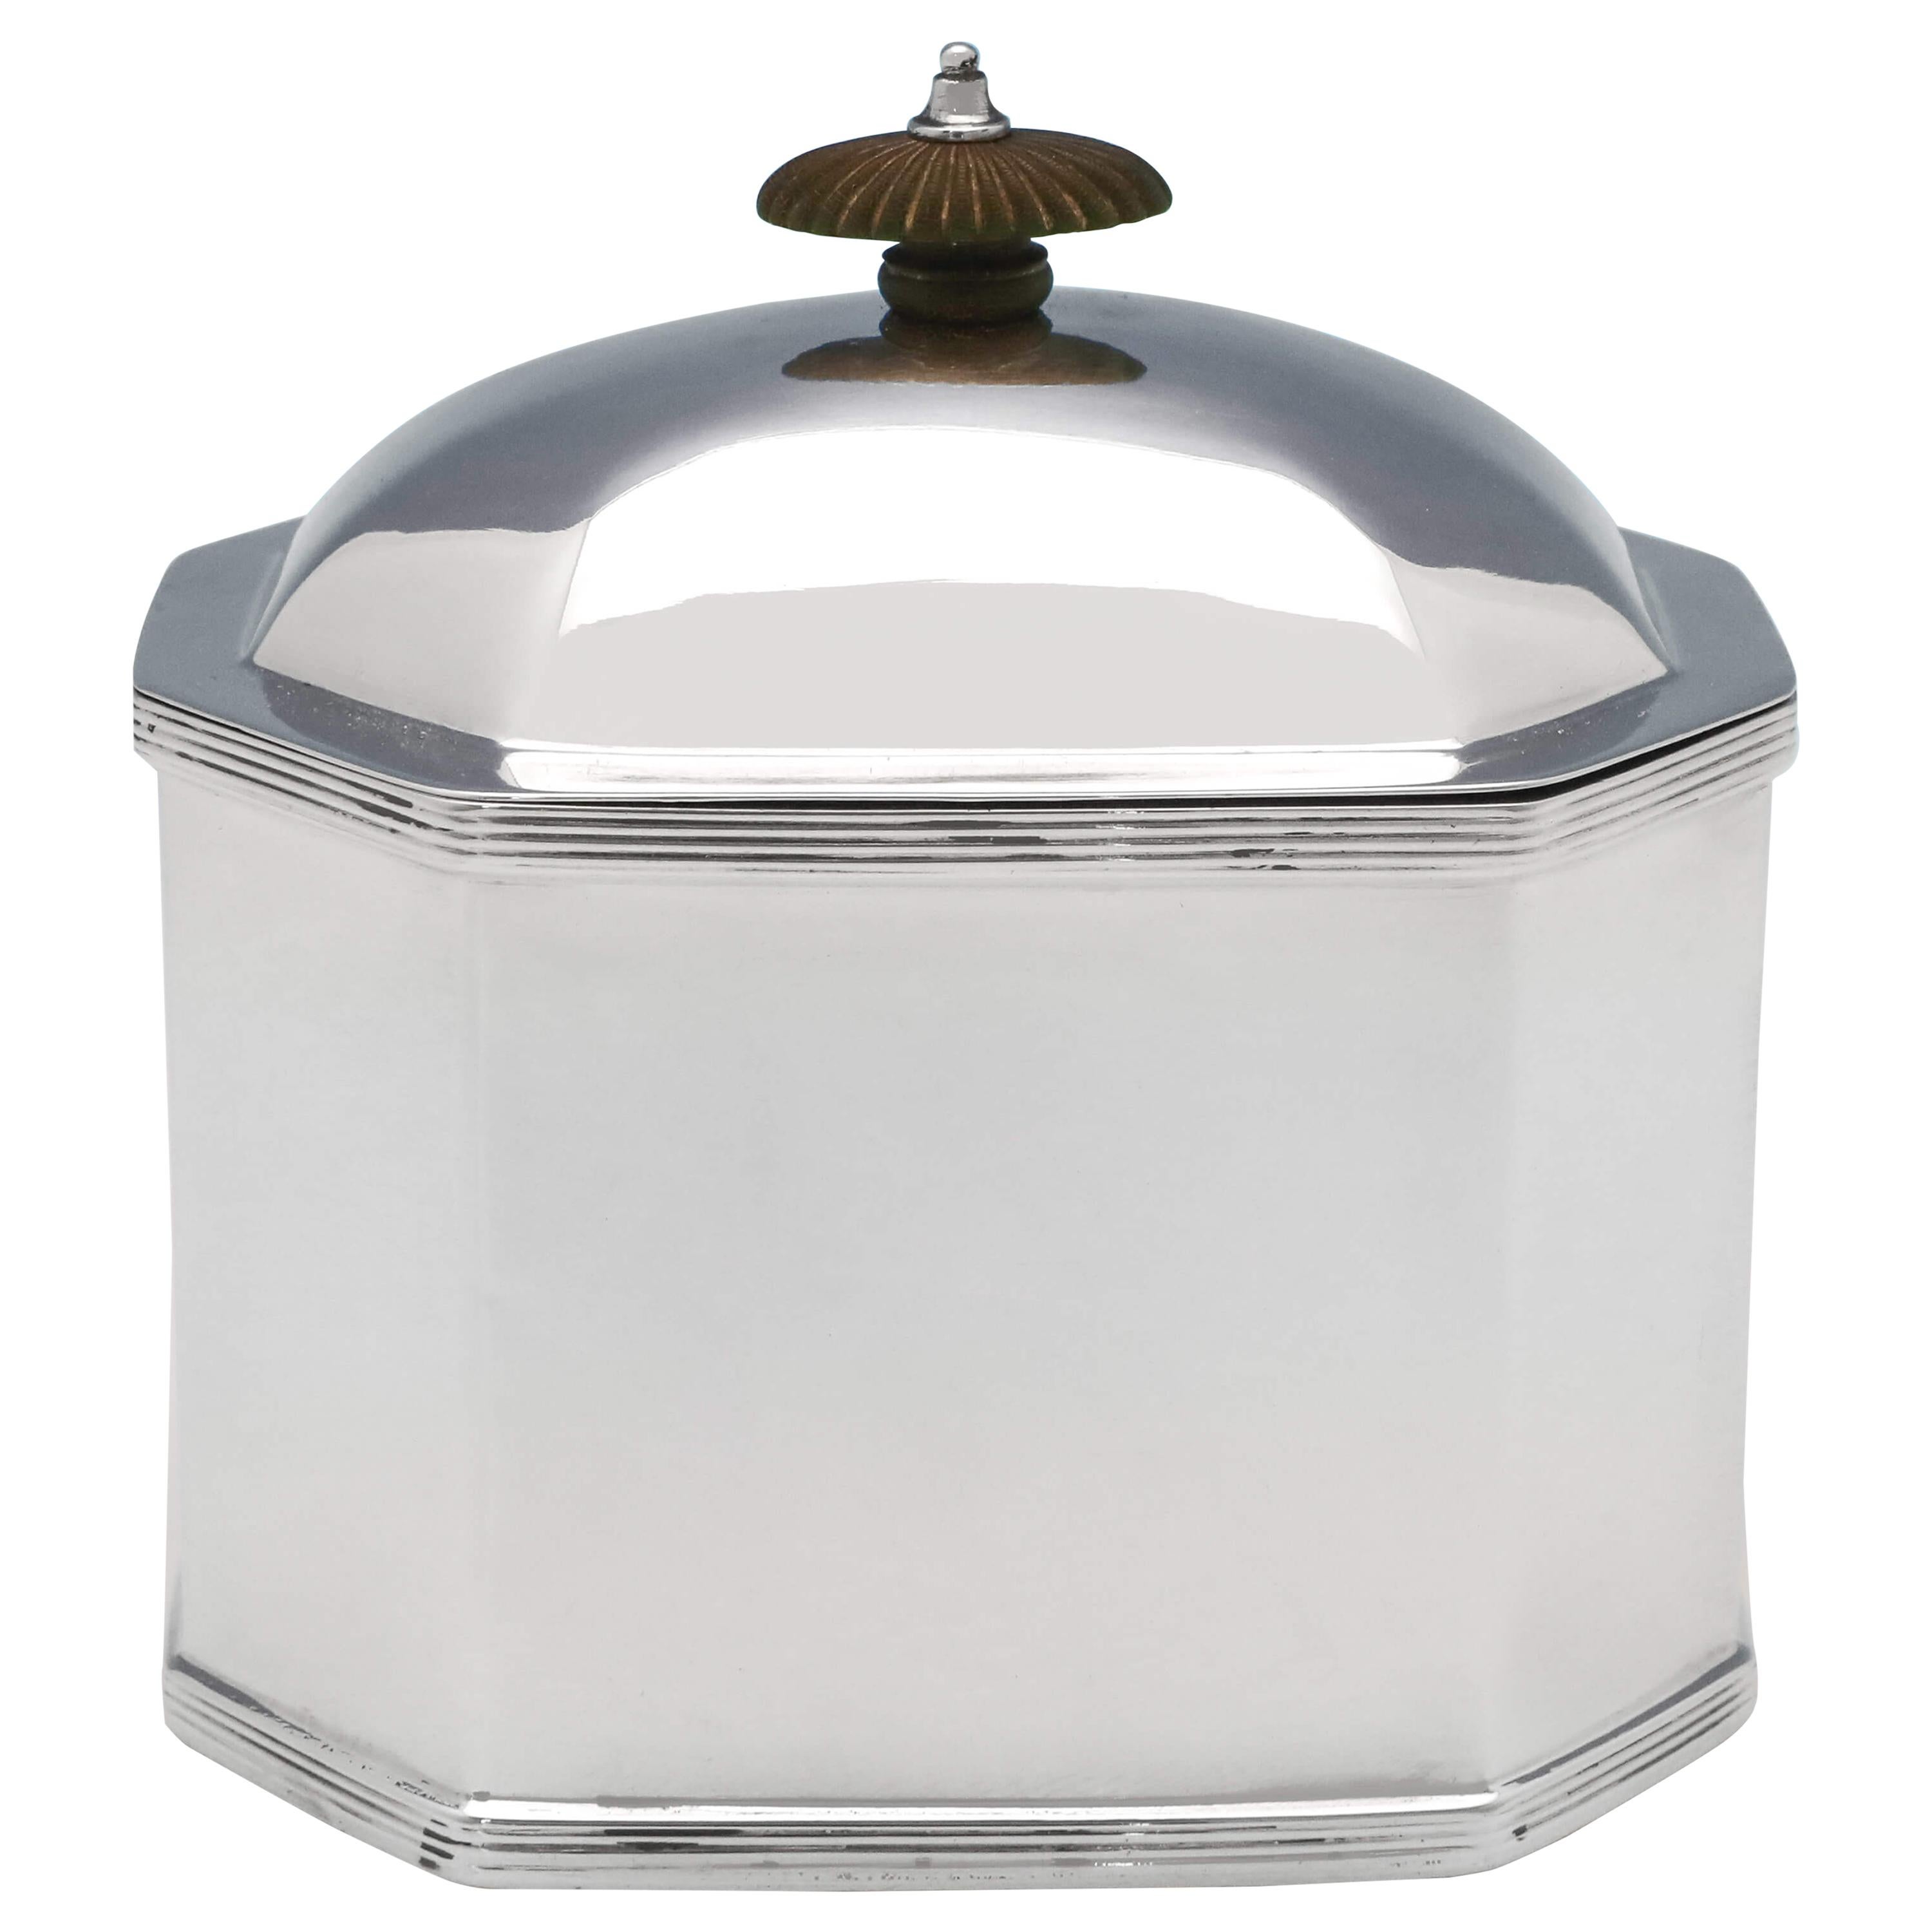 Octagonal Antique Sterling Silver Tea Caddy from 1920 by Thomas Bradbury & Sons